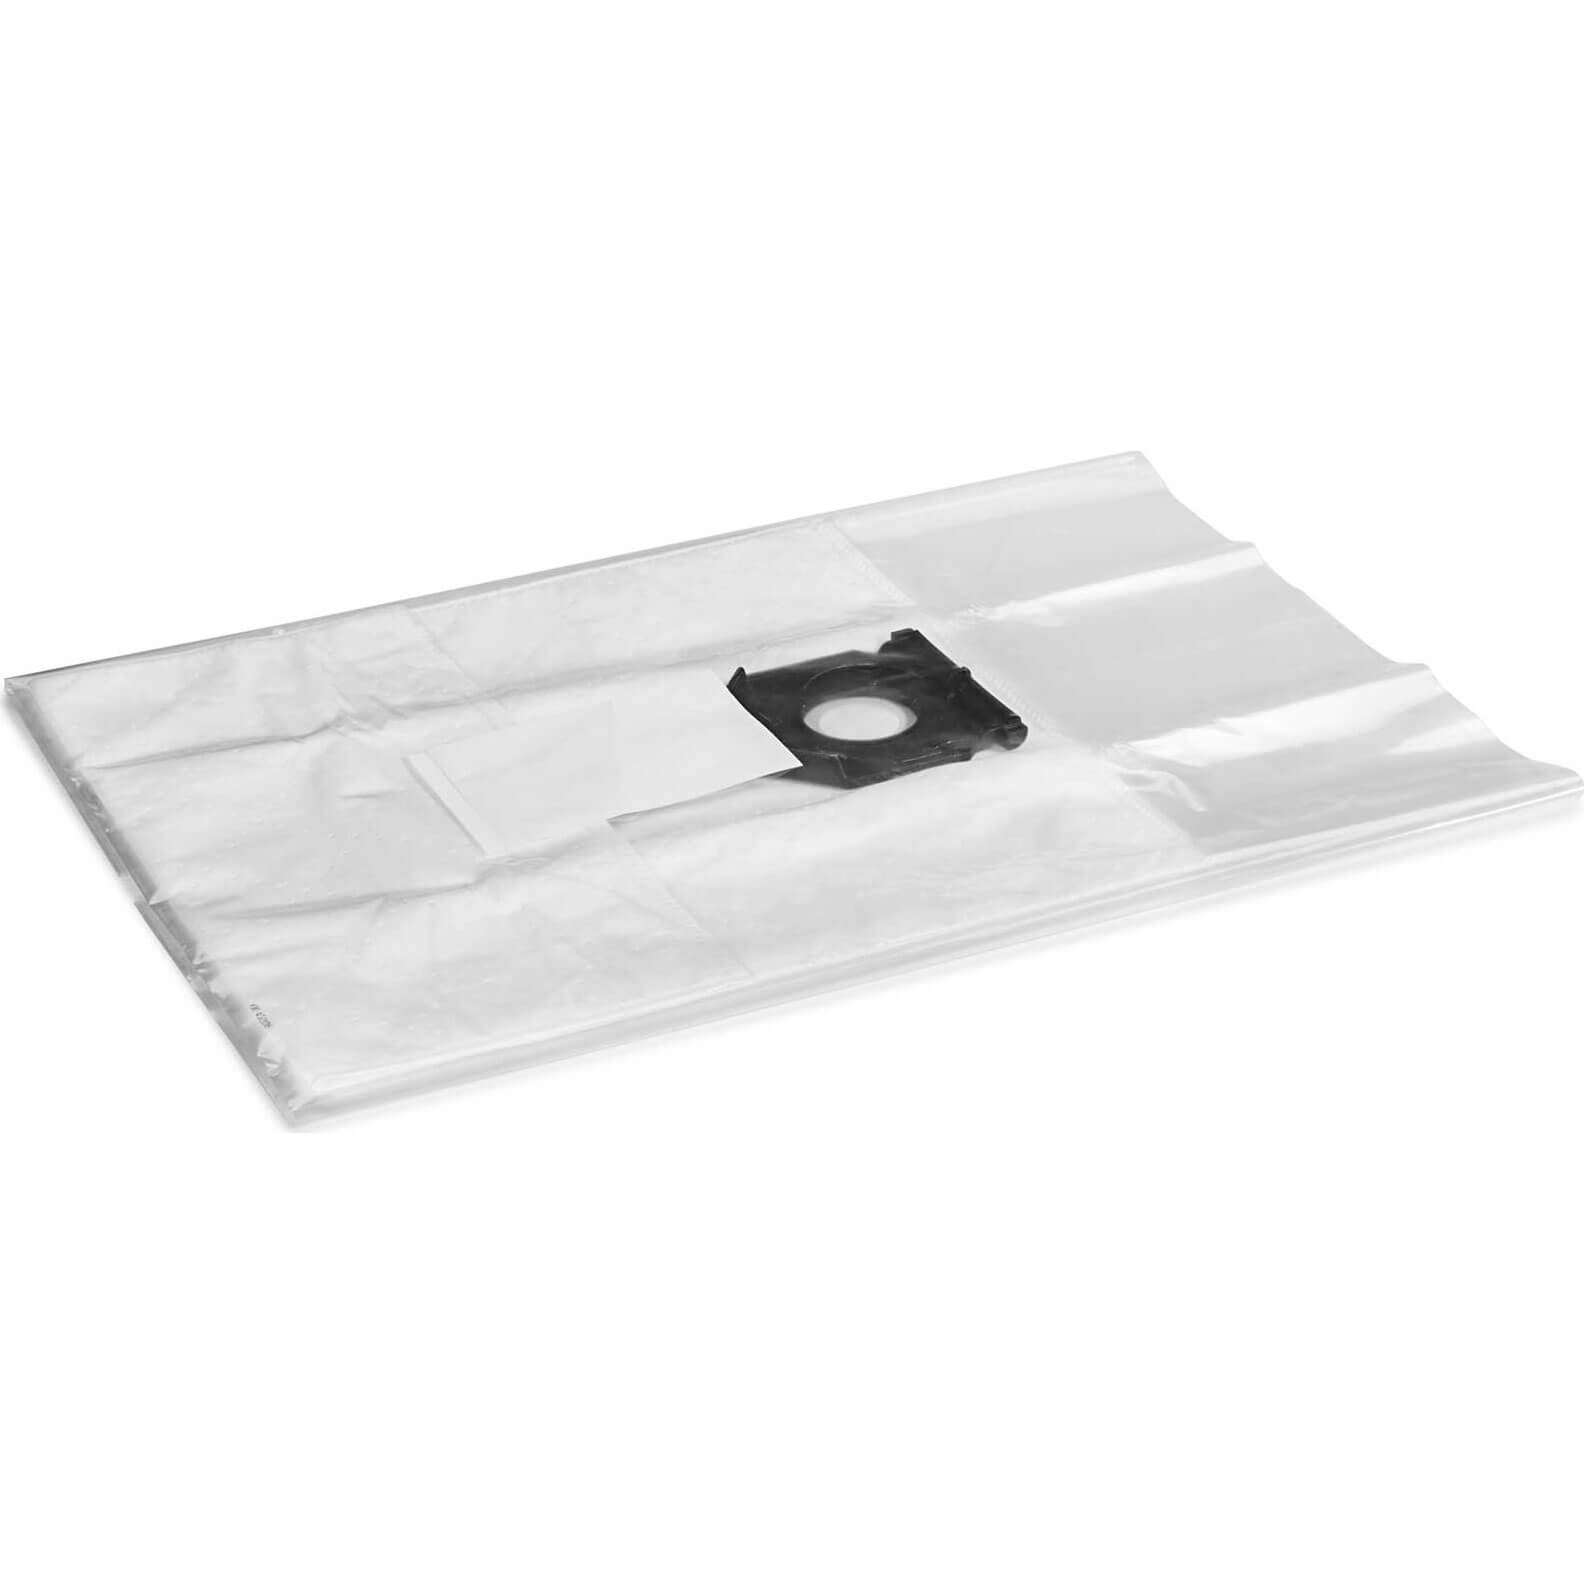 Image of Karcher M Class Safety Filter Dust Bags for NT 40/1 TACT Te Vacuum Cleaners Pack of 5